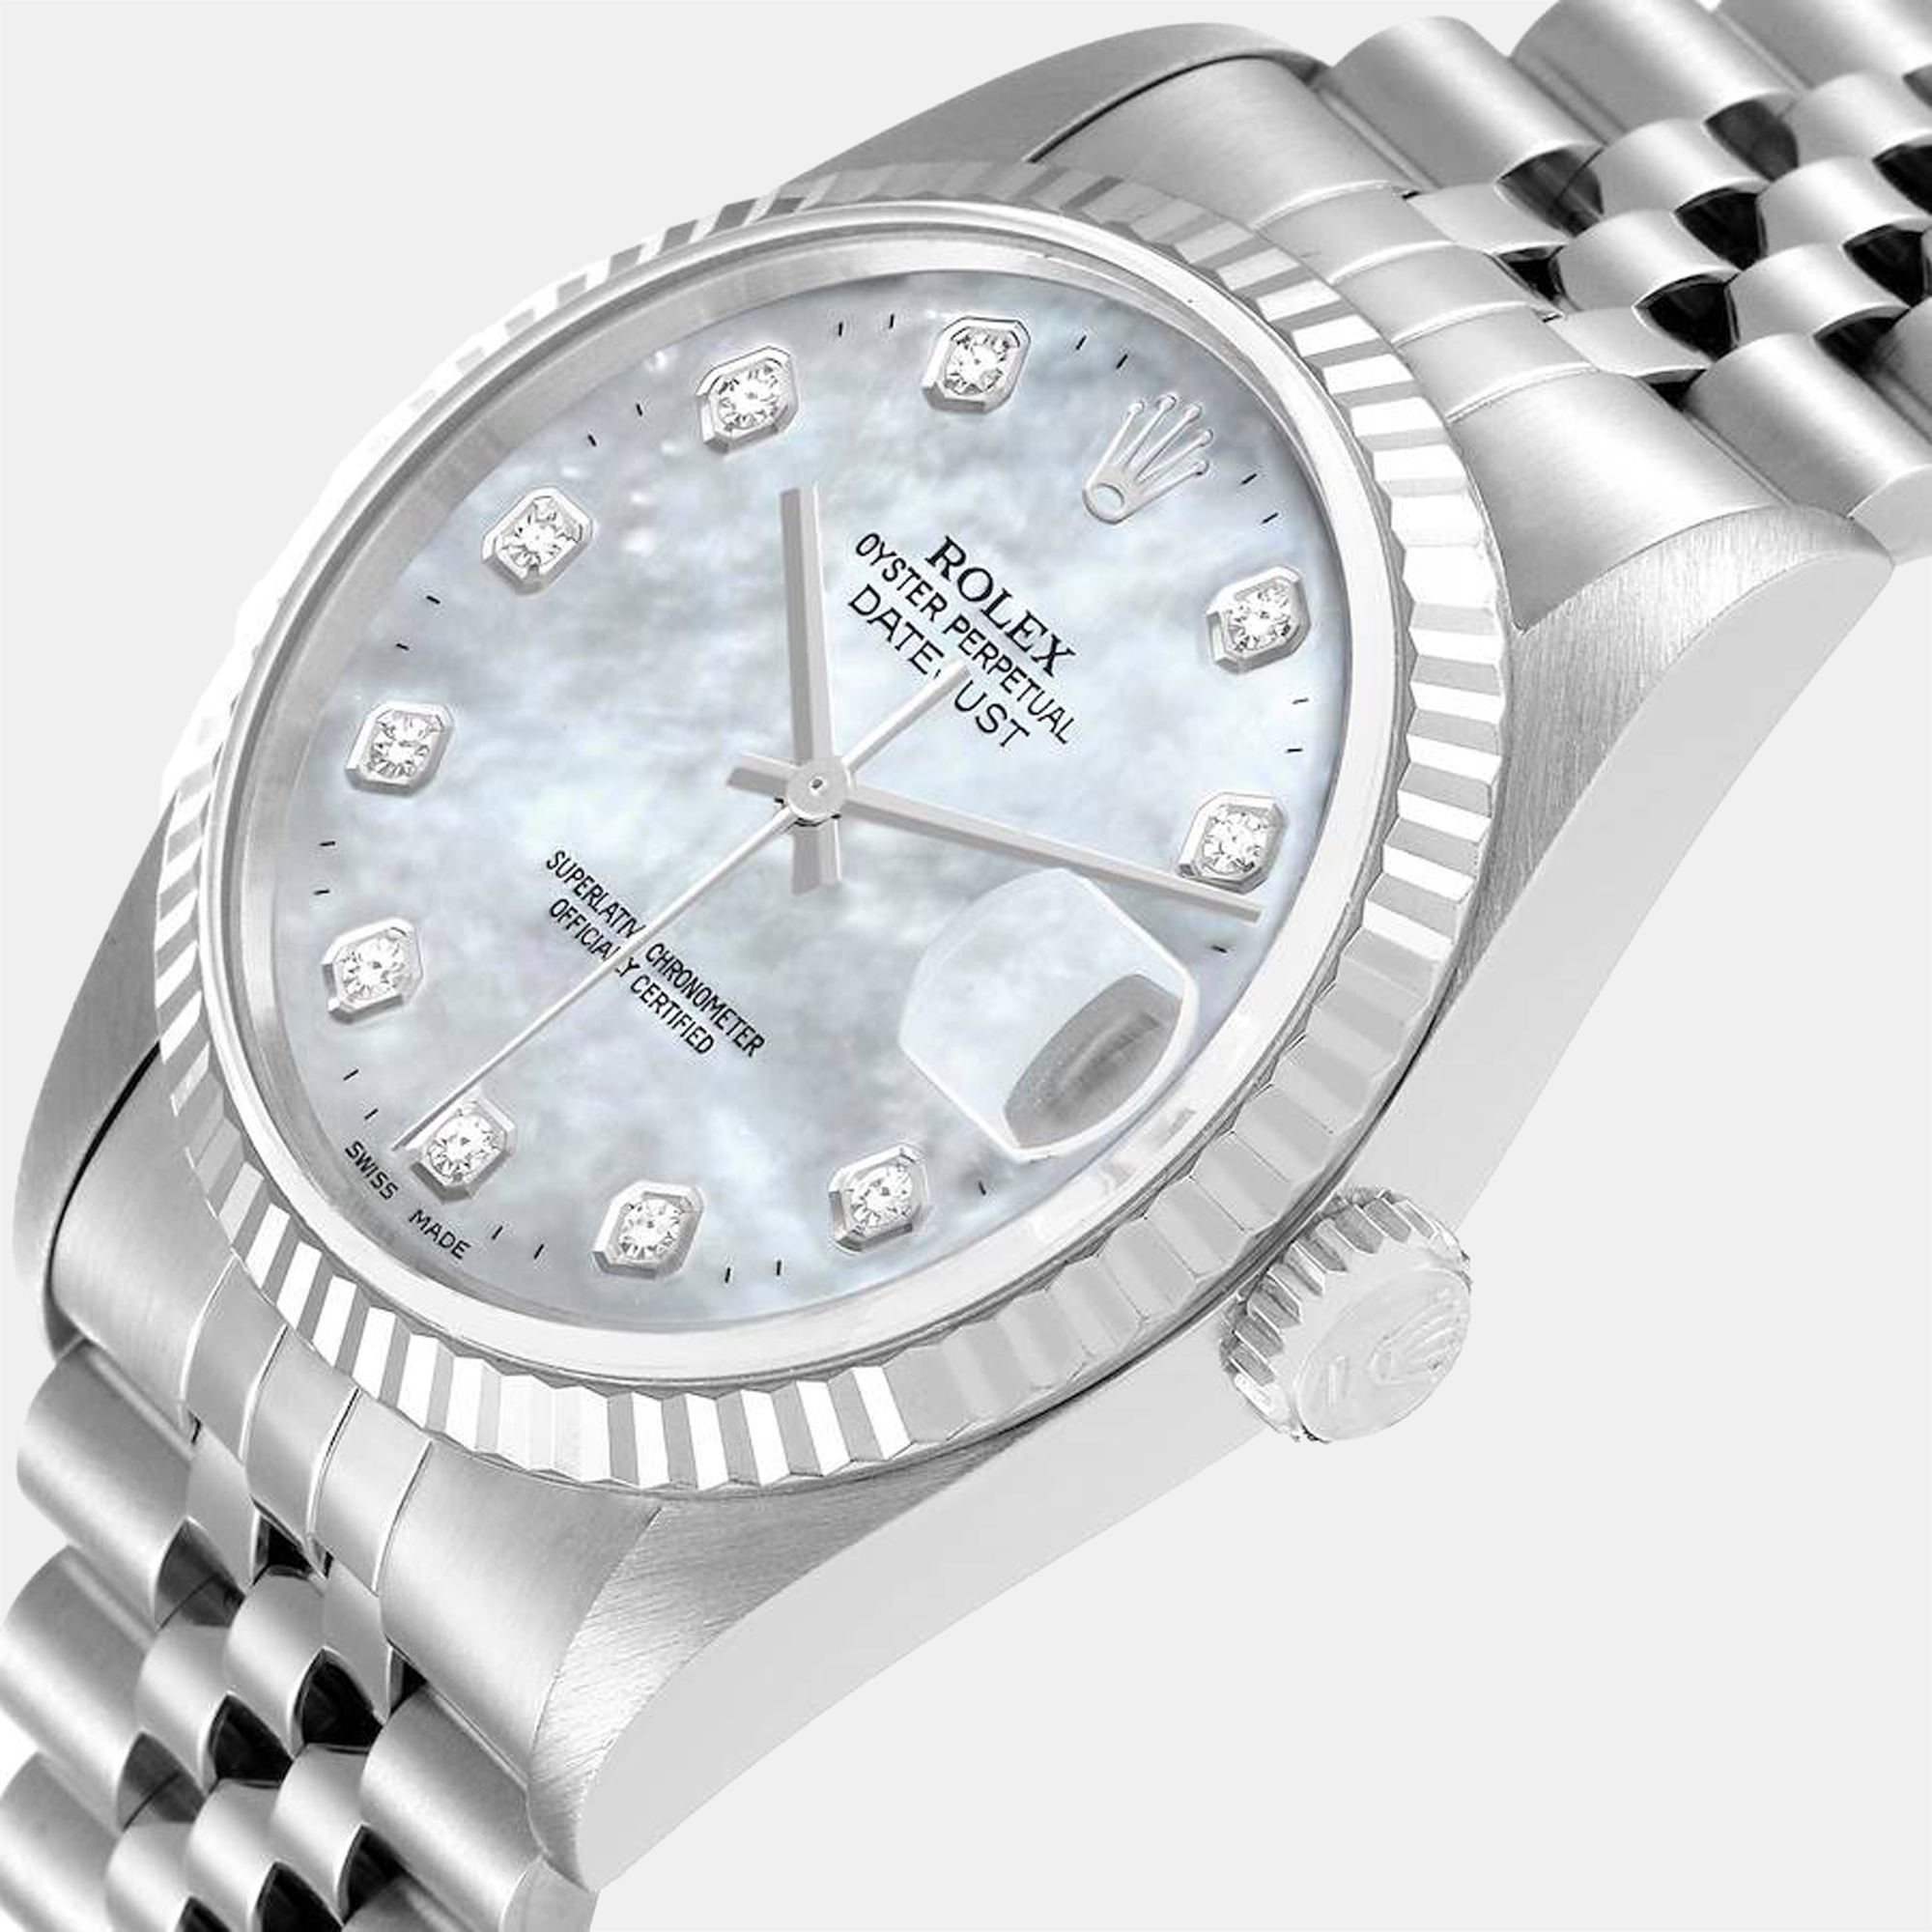 

Rolex MOP Diamonds 18k White Gold And Stainless Steel Datejust 16234 Men's Wristwatch 36 mm